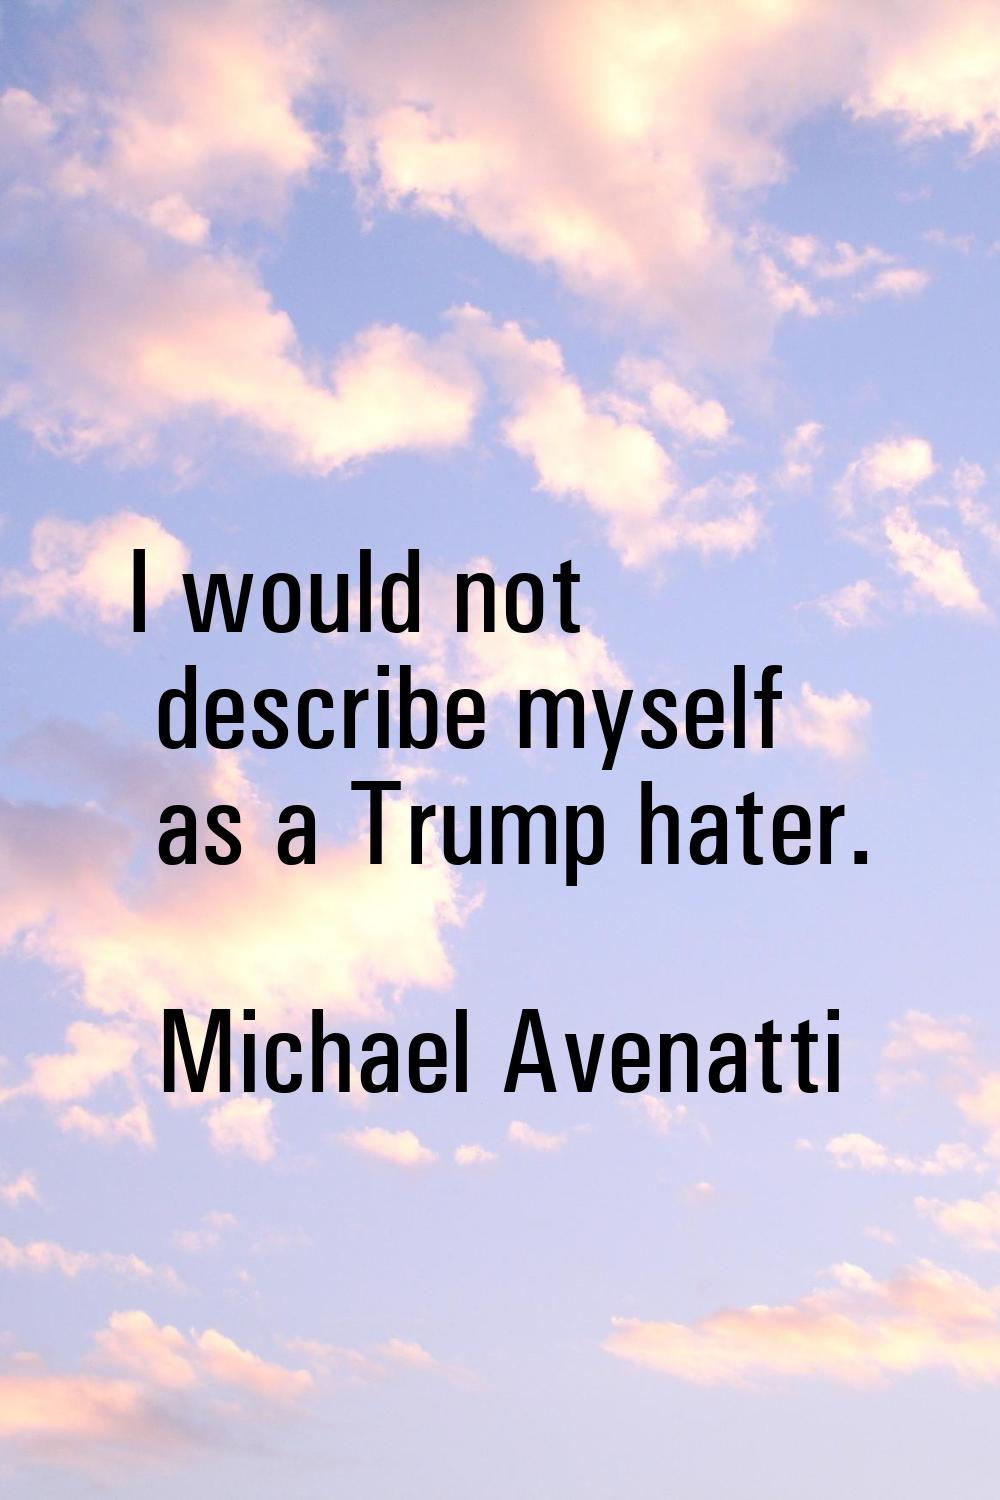 I would not describe myself as a Trump hater.